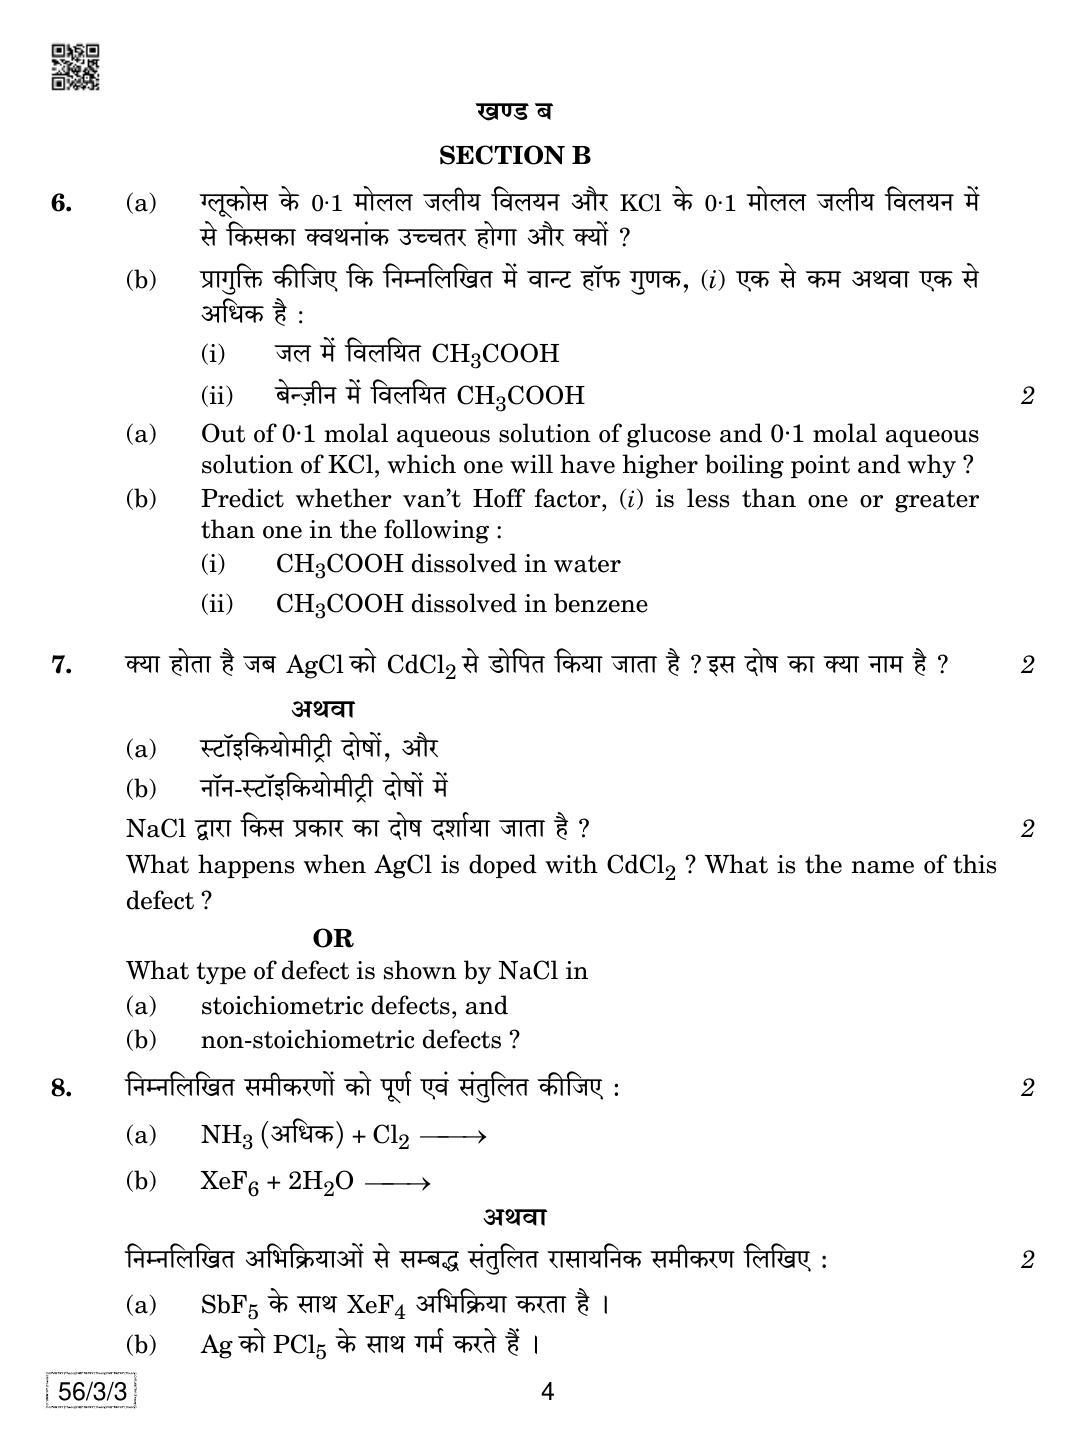 CBSE Class 12 56-3-3 Chemistry 2019 Question Paper - Page 4